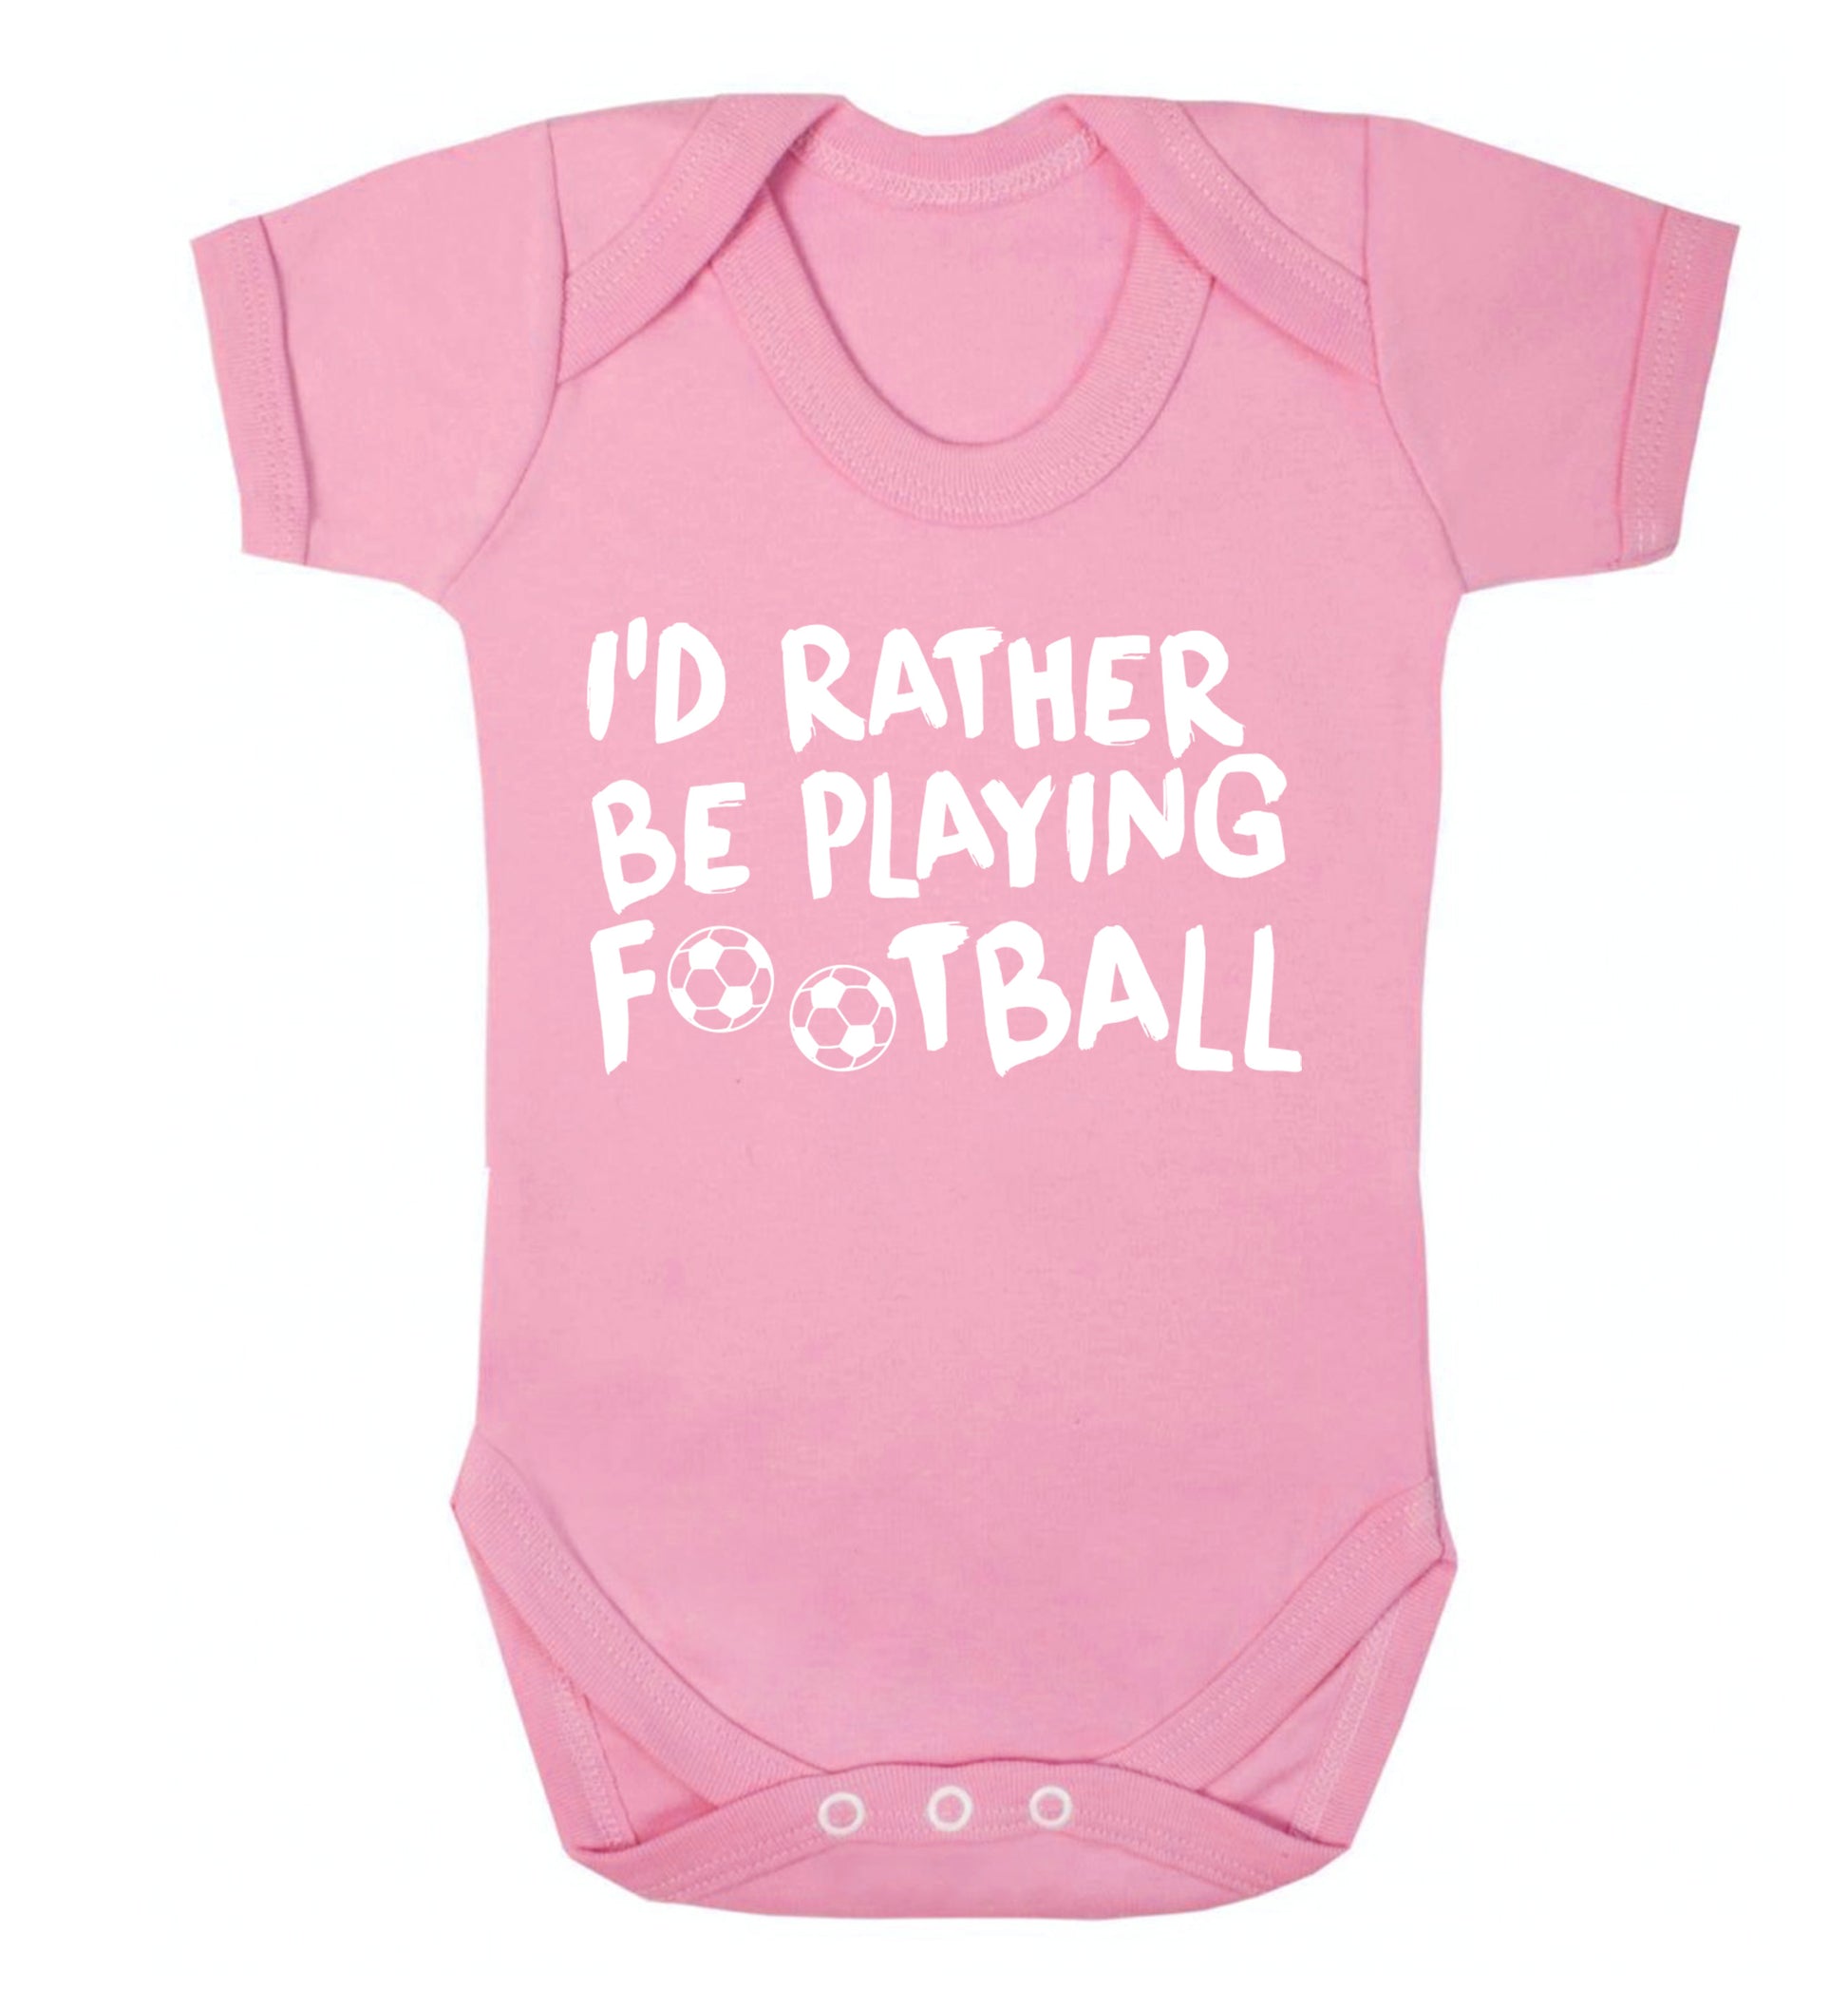 I'd rather be playing football Baby Vest pale pink 18-24 months